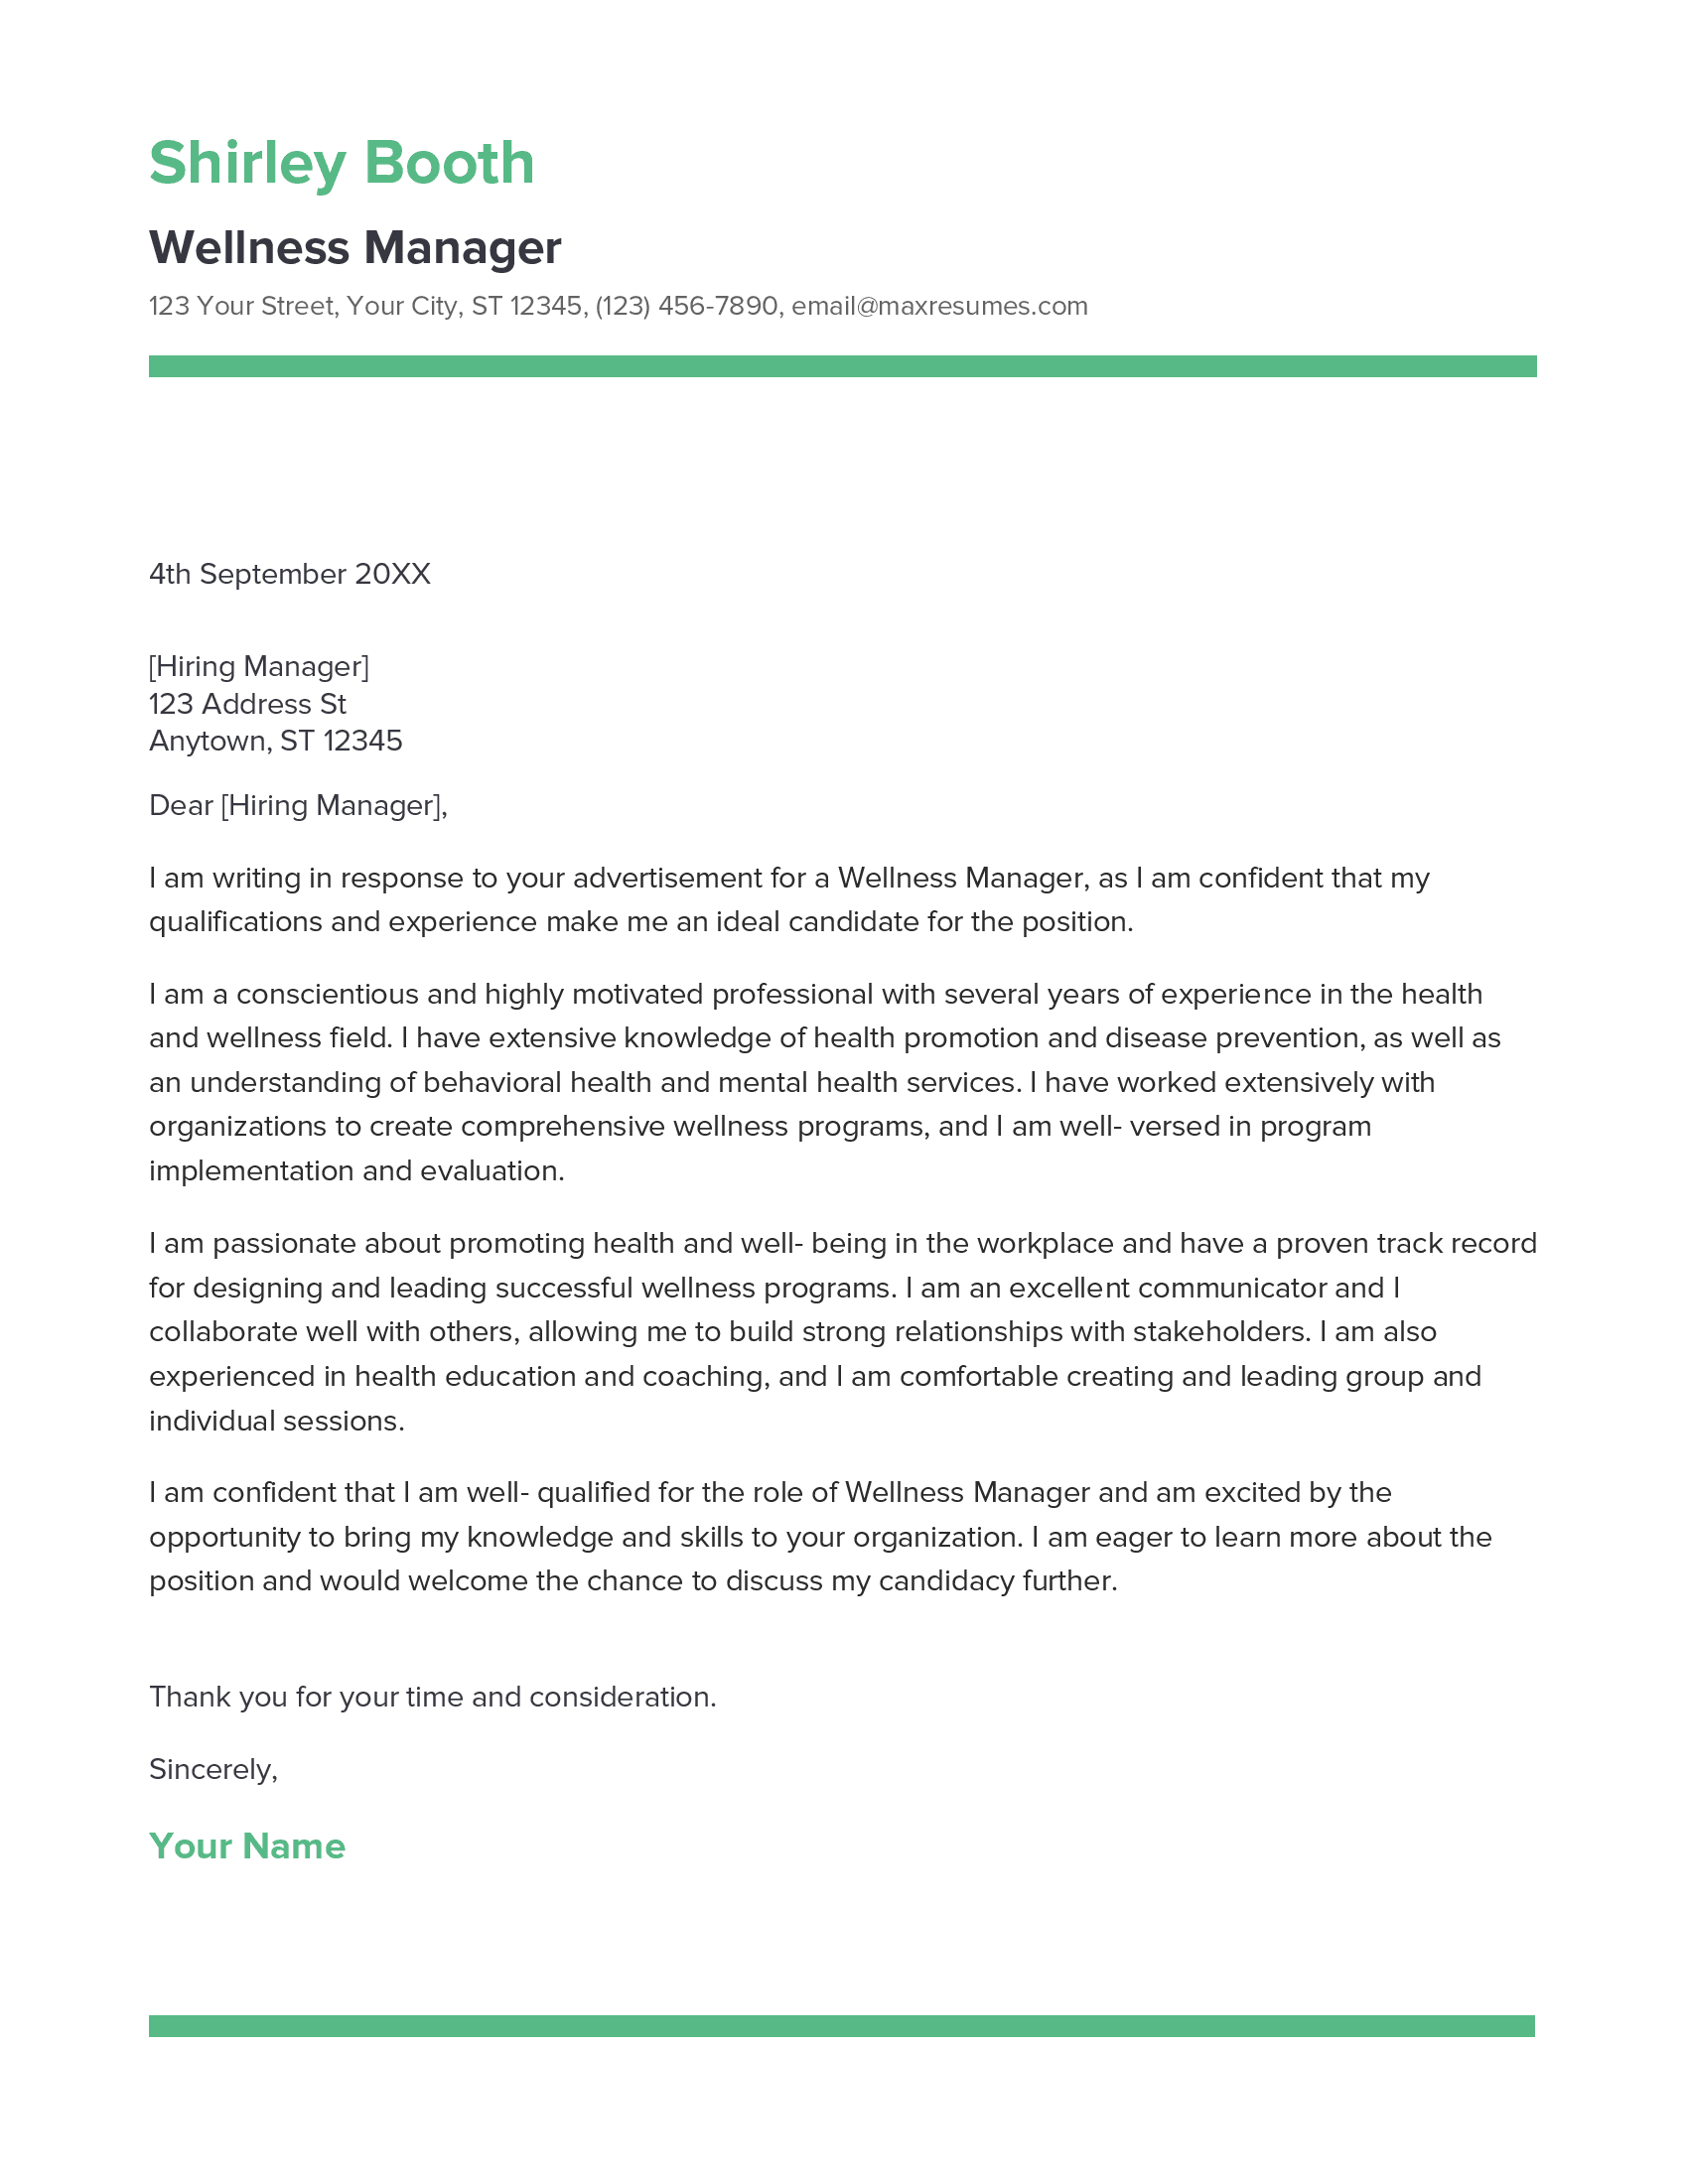 Wellness Manager Cover Letter Example